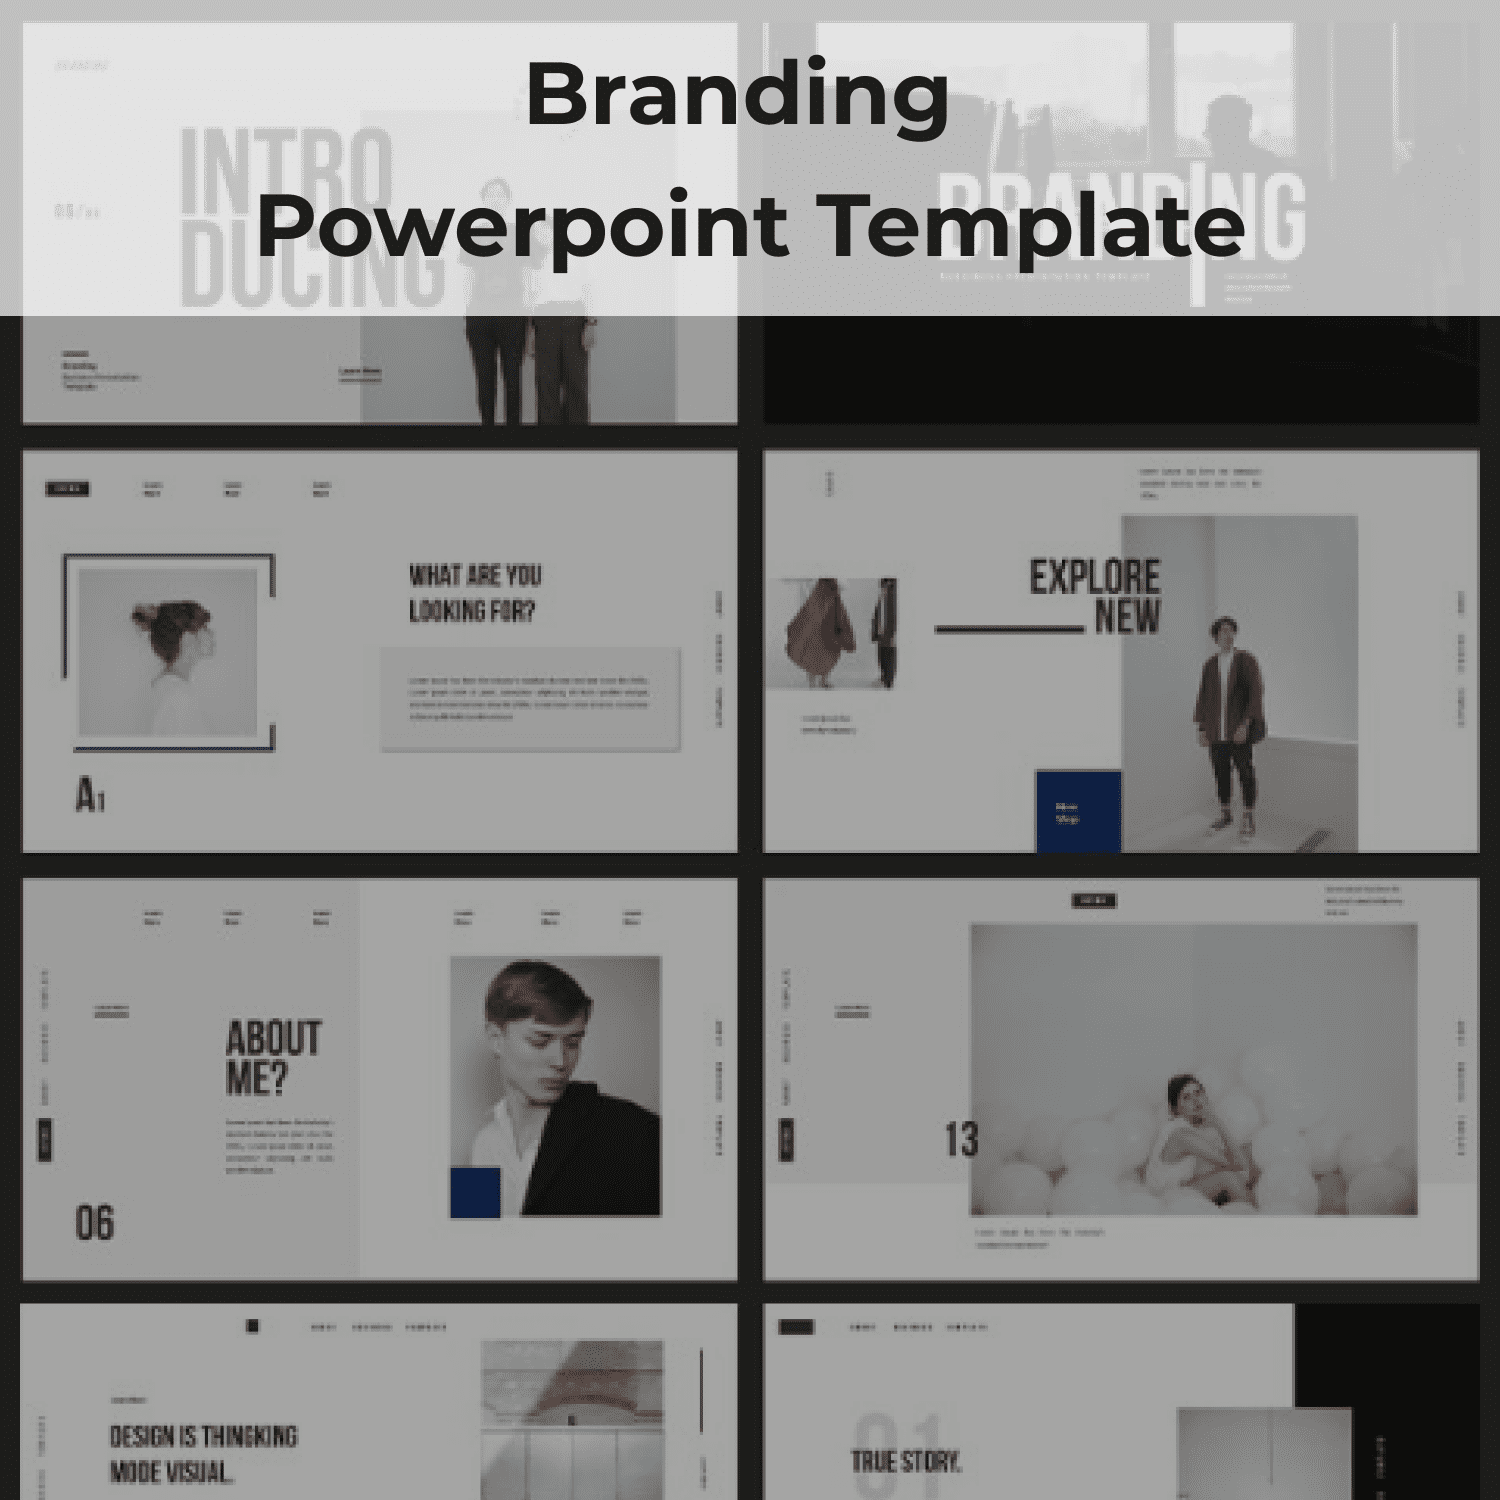 Branding Powerpoint Template cover image.